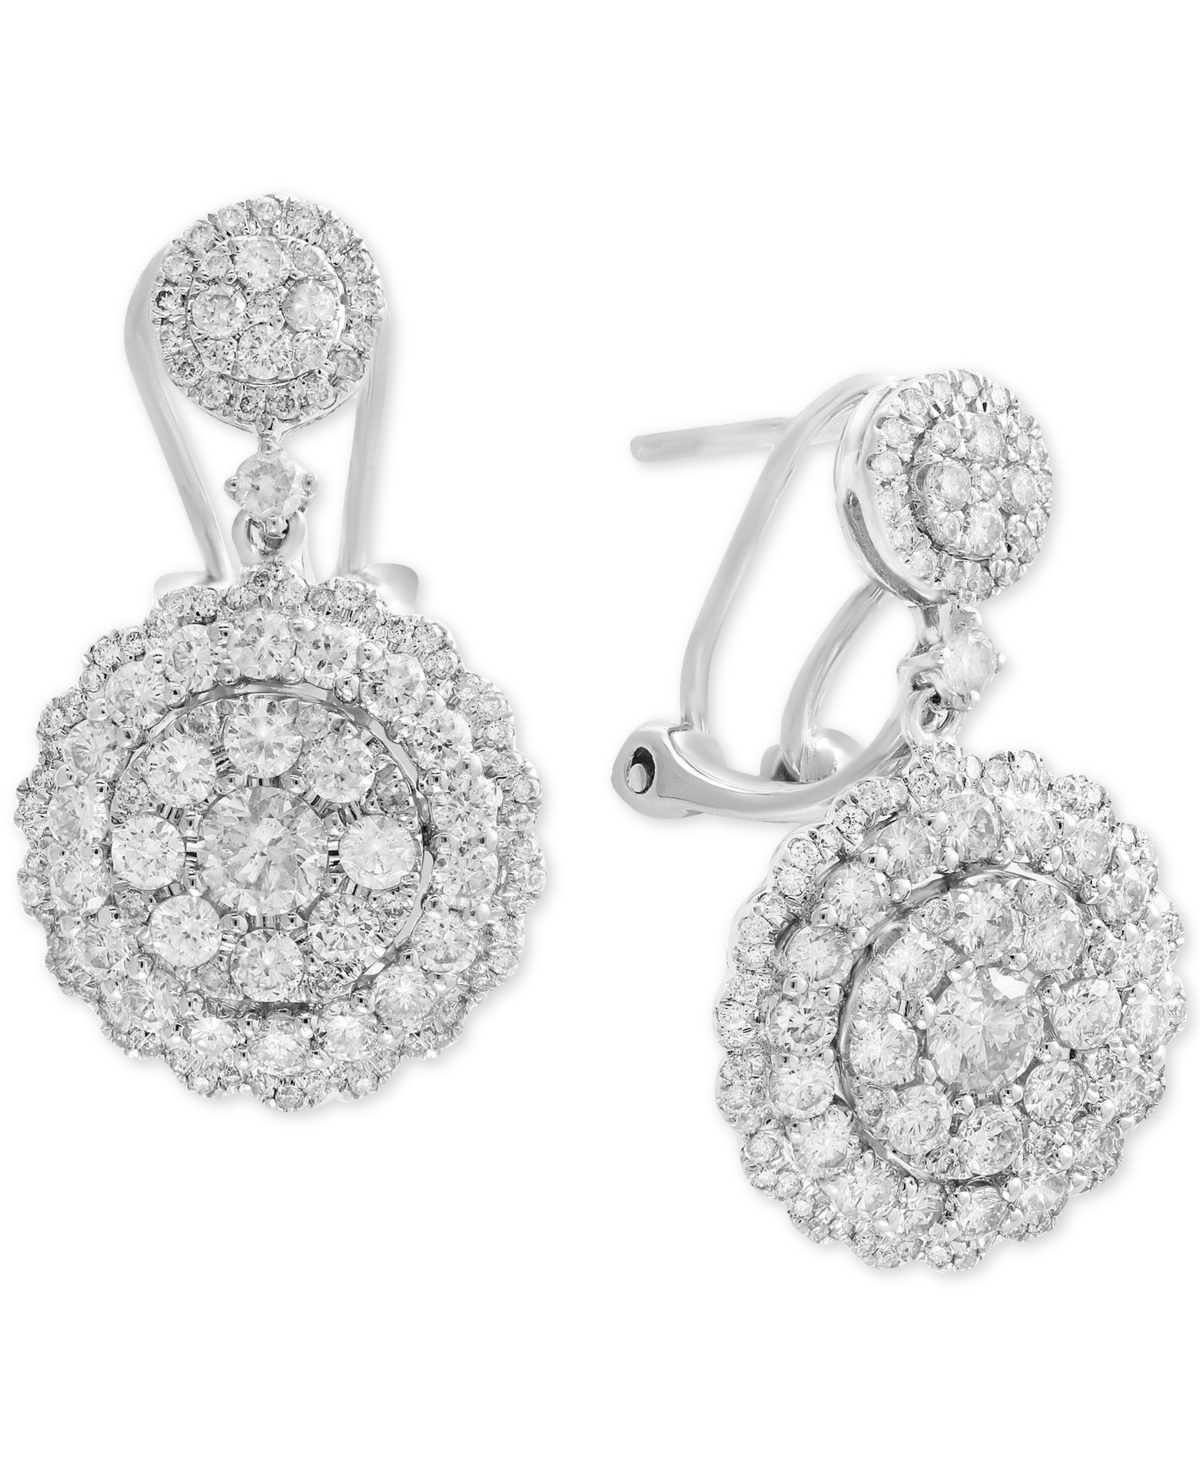 Rock Candy by Effy Diamond Cluster Drop Earrings (2-1/10 ct. t.w.) in 14k White, Rose, or Yellow Gold - White Gold